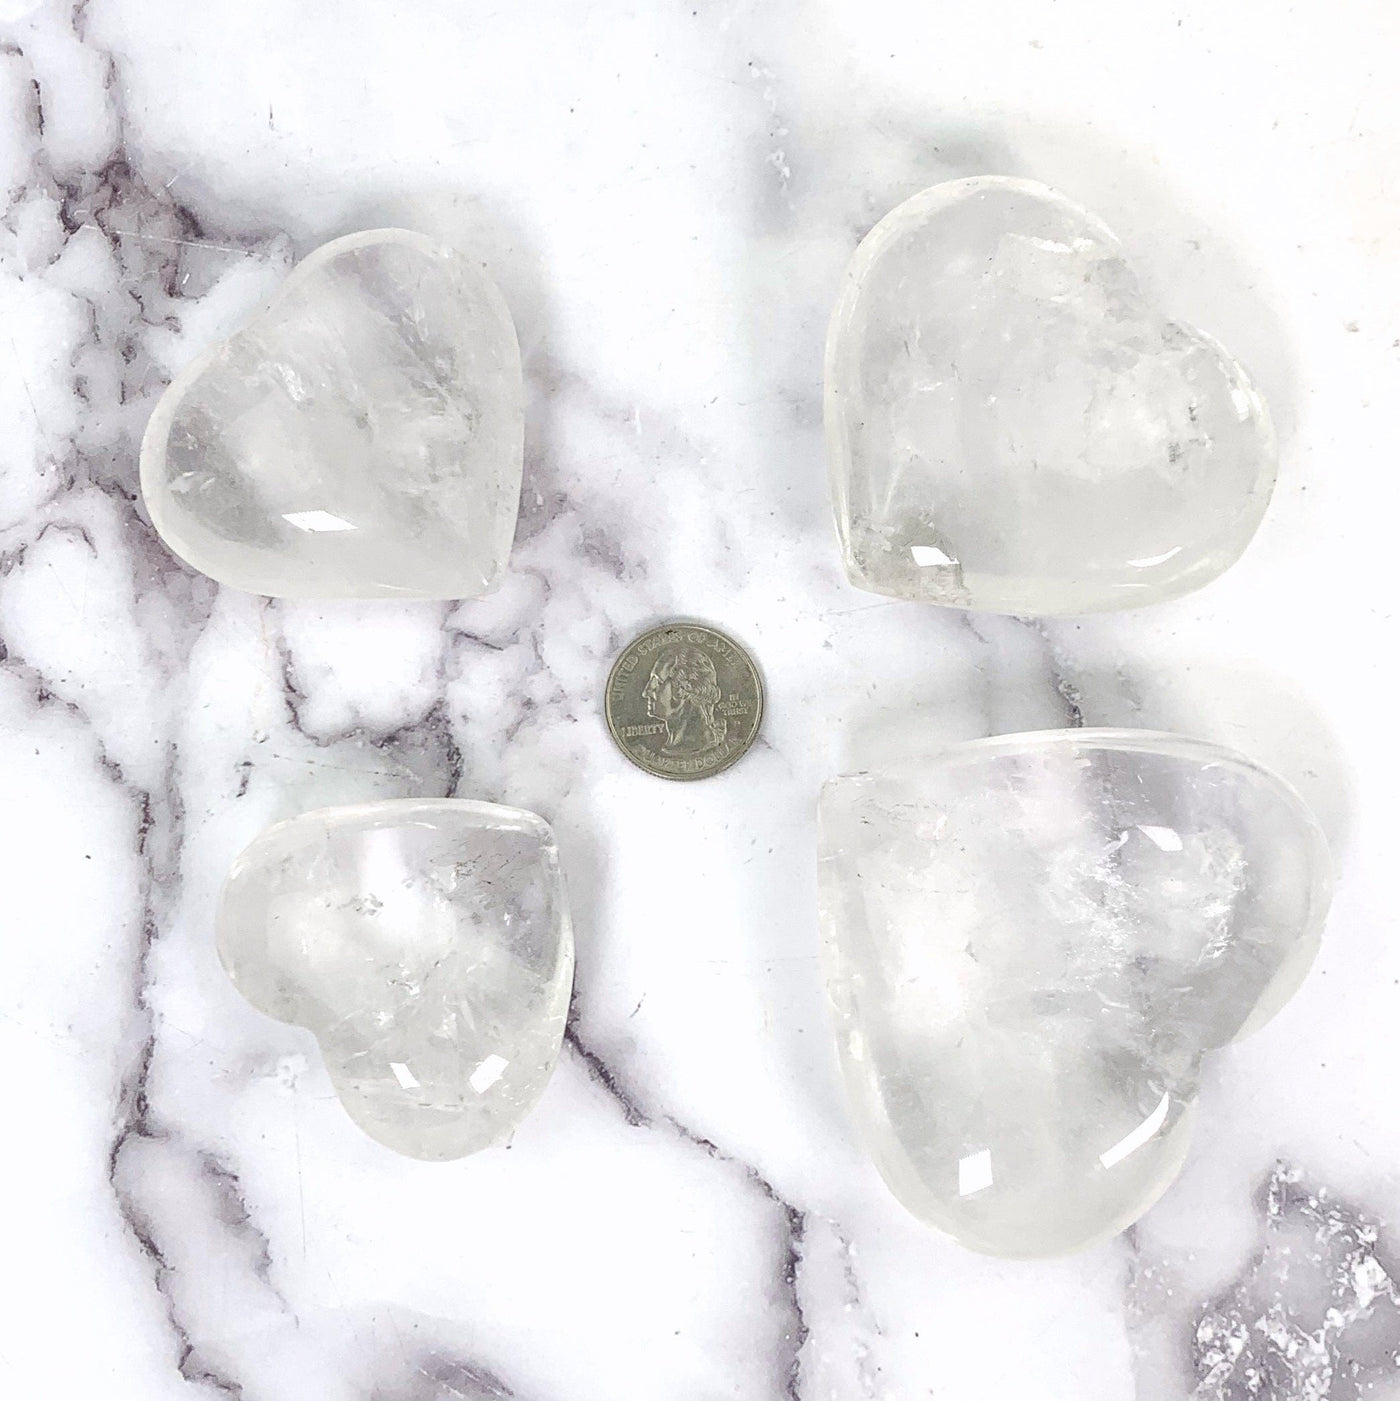 Crystal Quartz Heart--Top view of all 4 hearts comparing a quarter for size reference, on a white marble background.